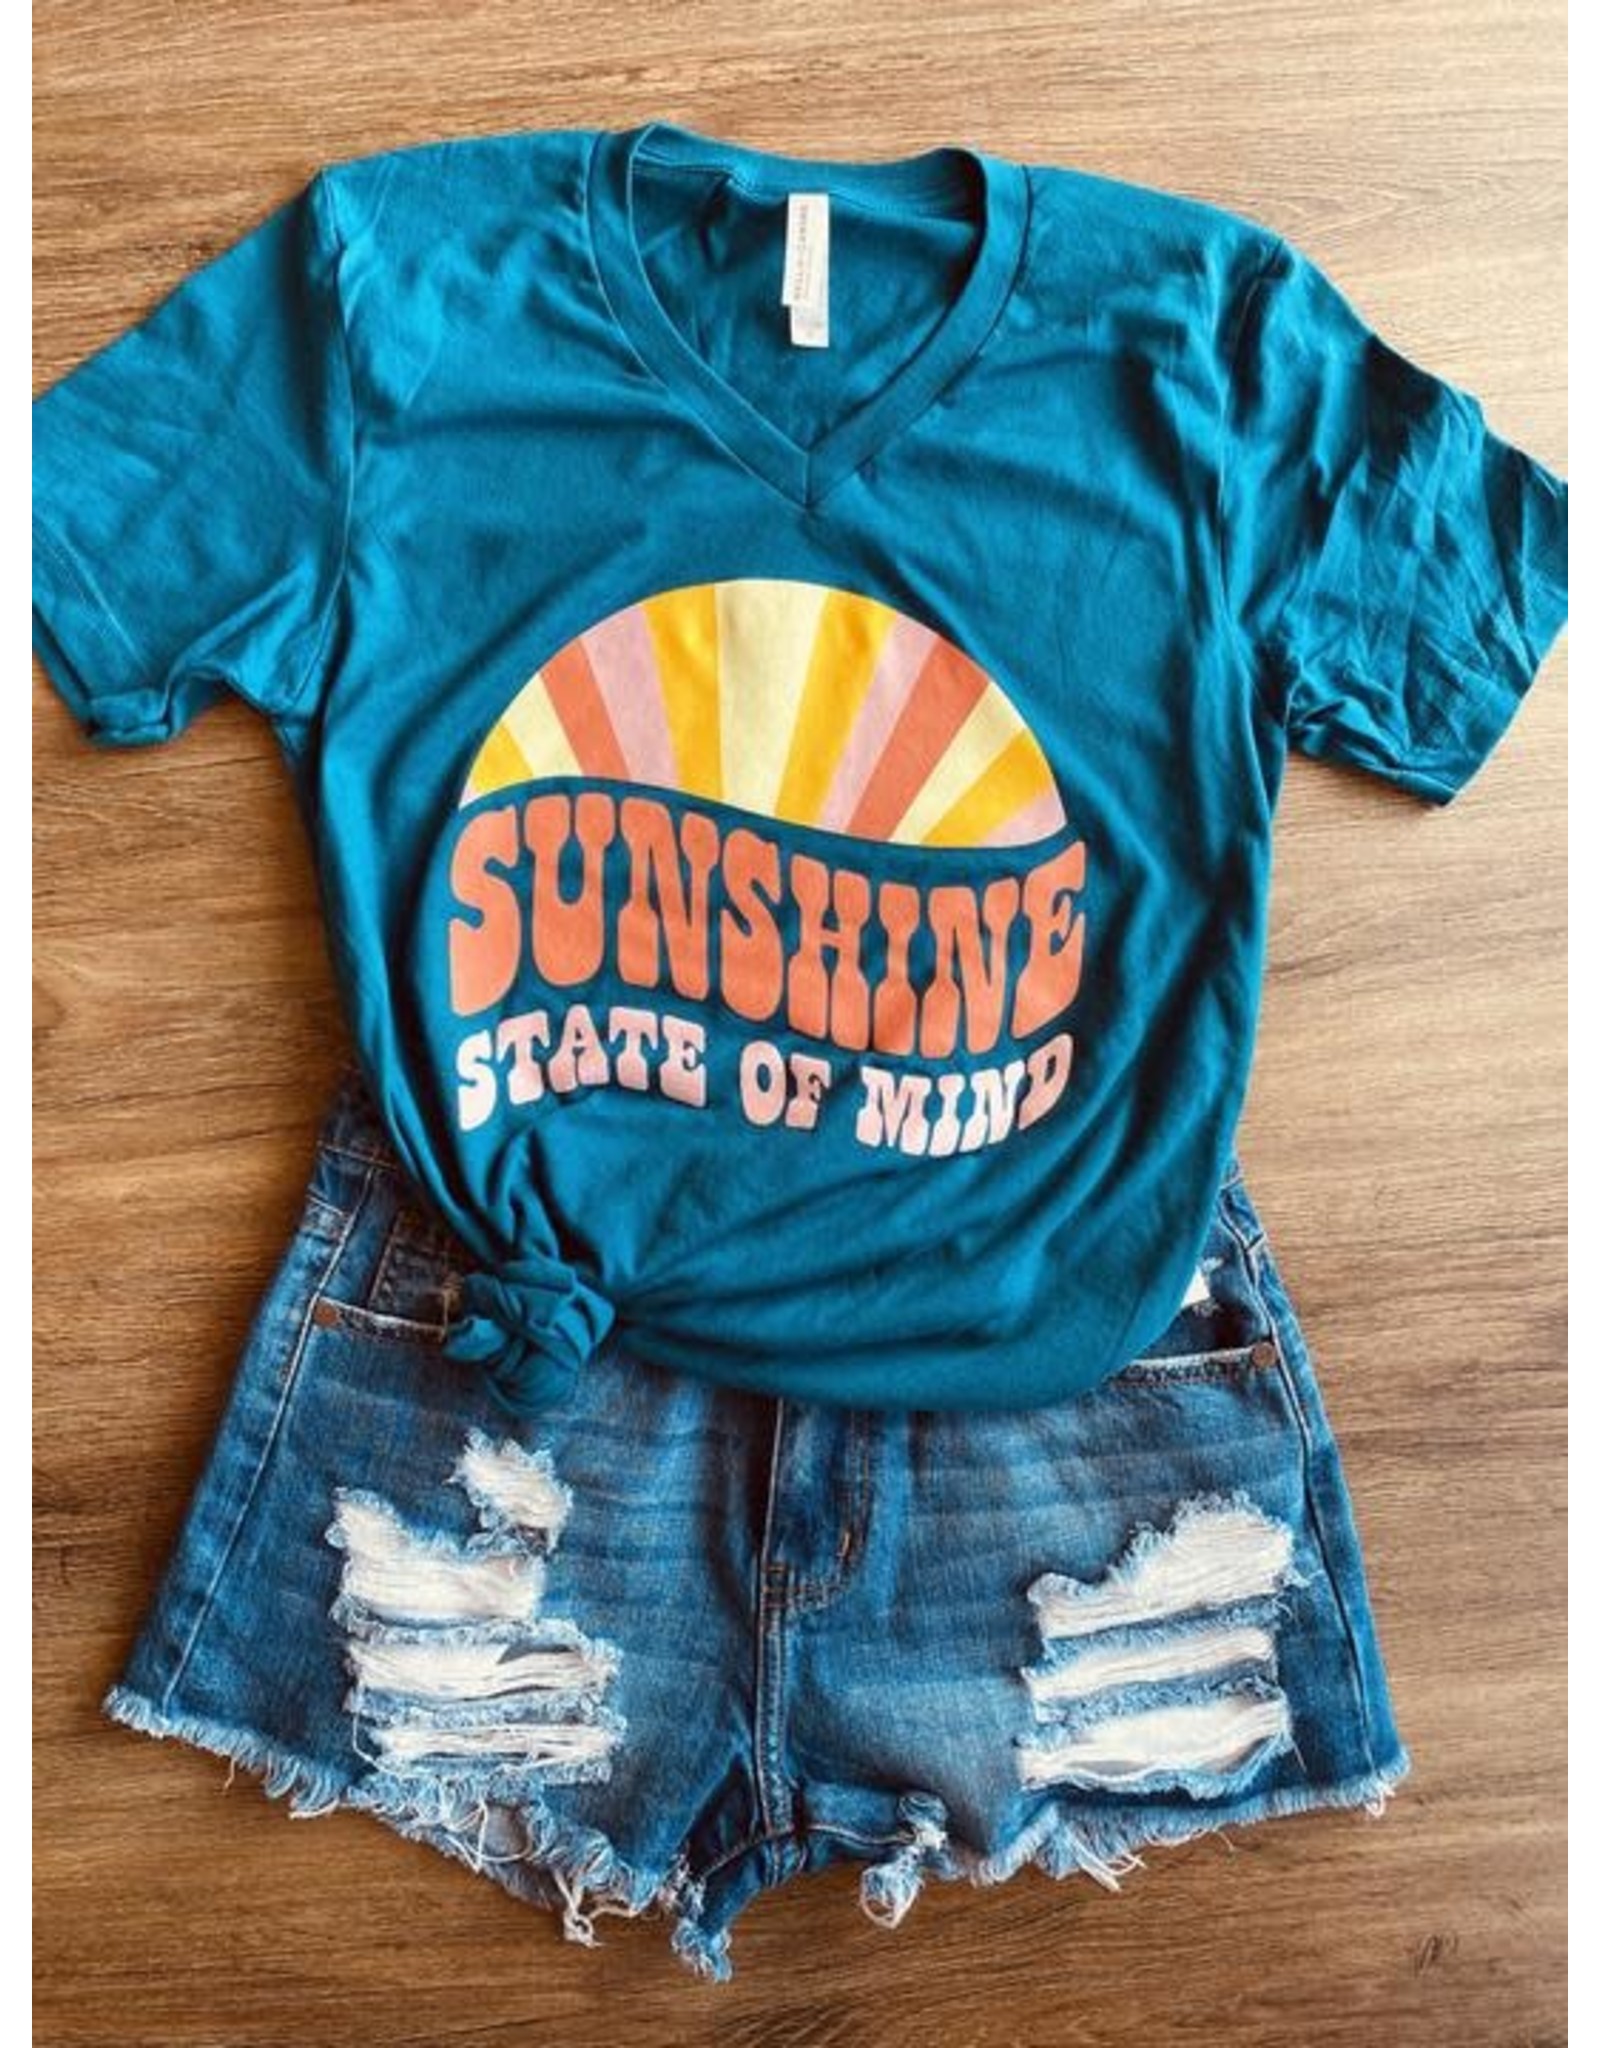 Texas Heart Co Sunshine State of Mind T-Shirt